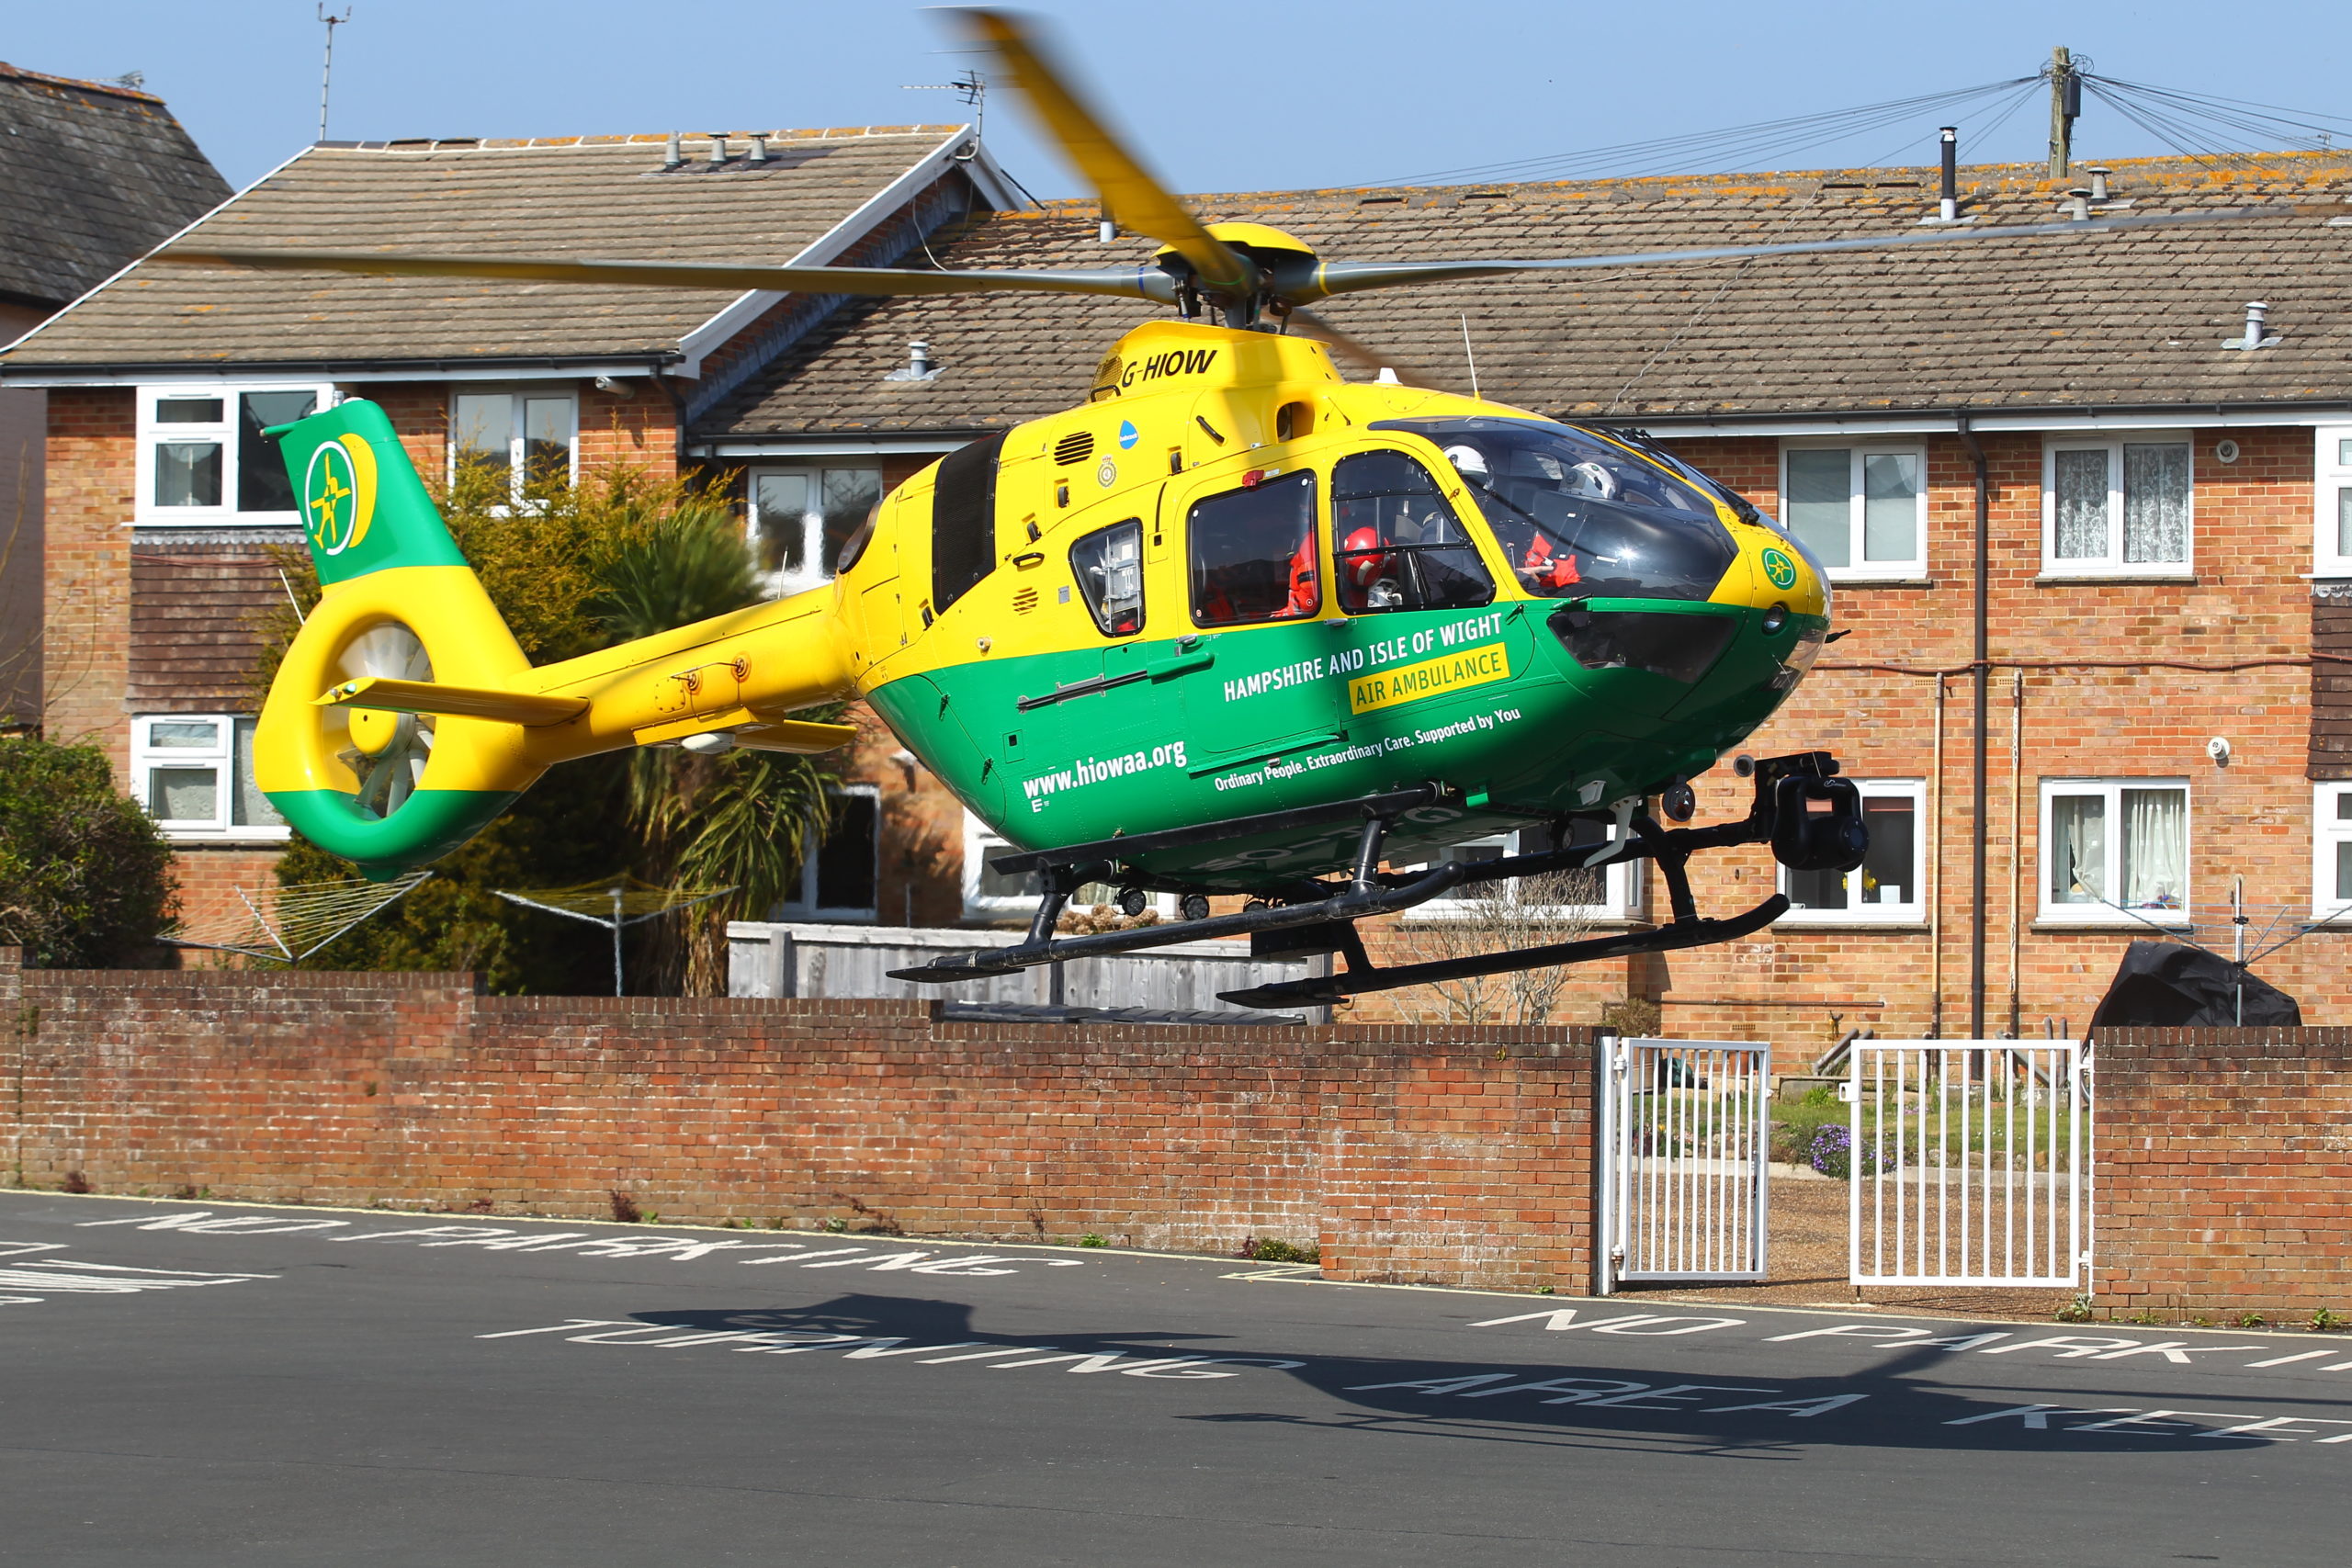 A helicopter landing in a road in front of a row of houses